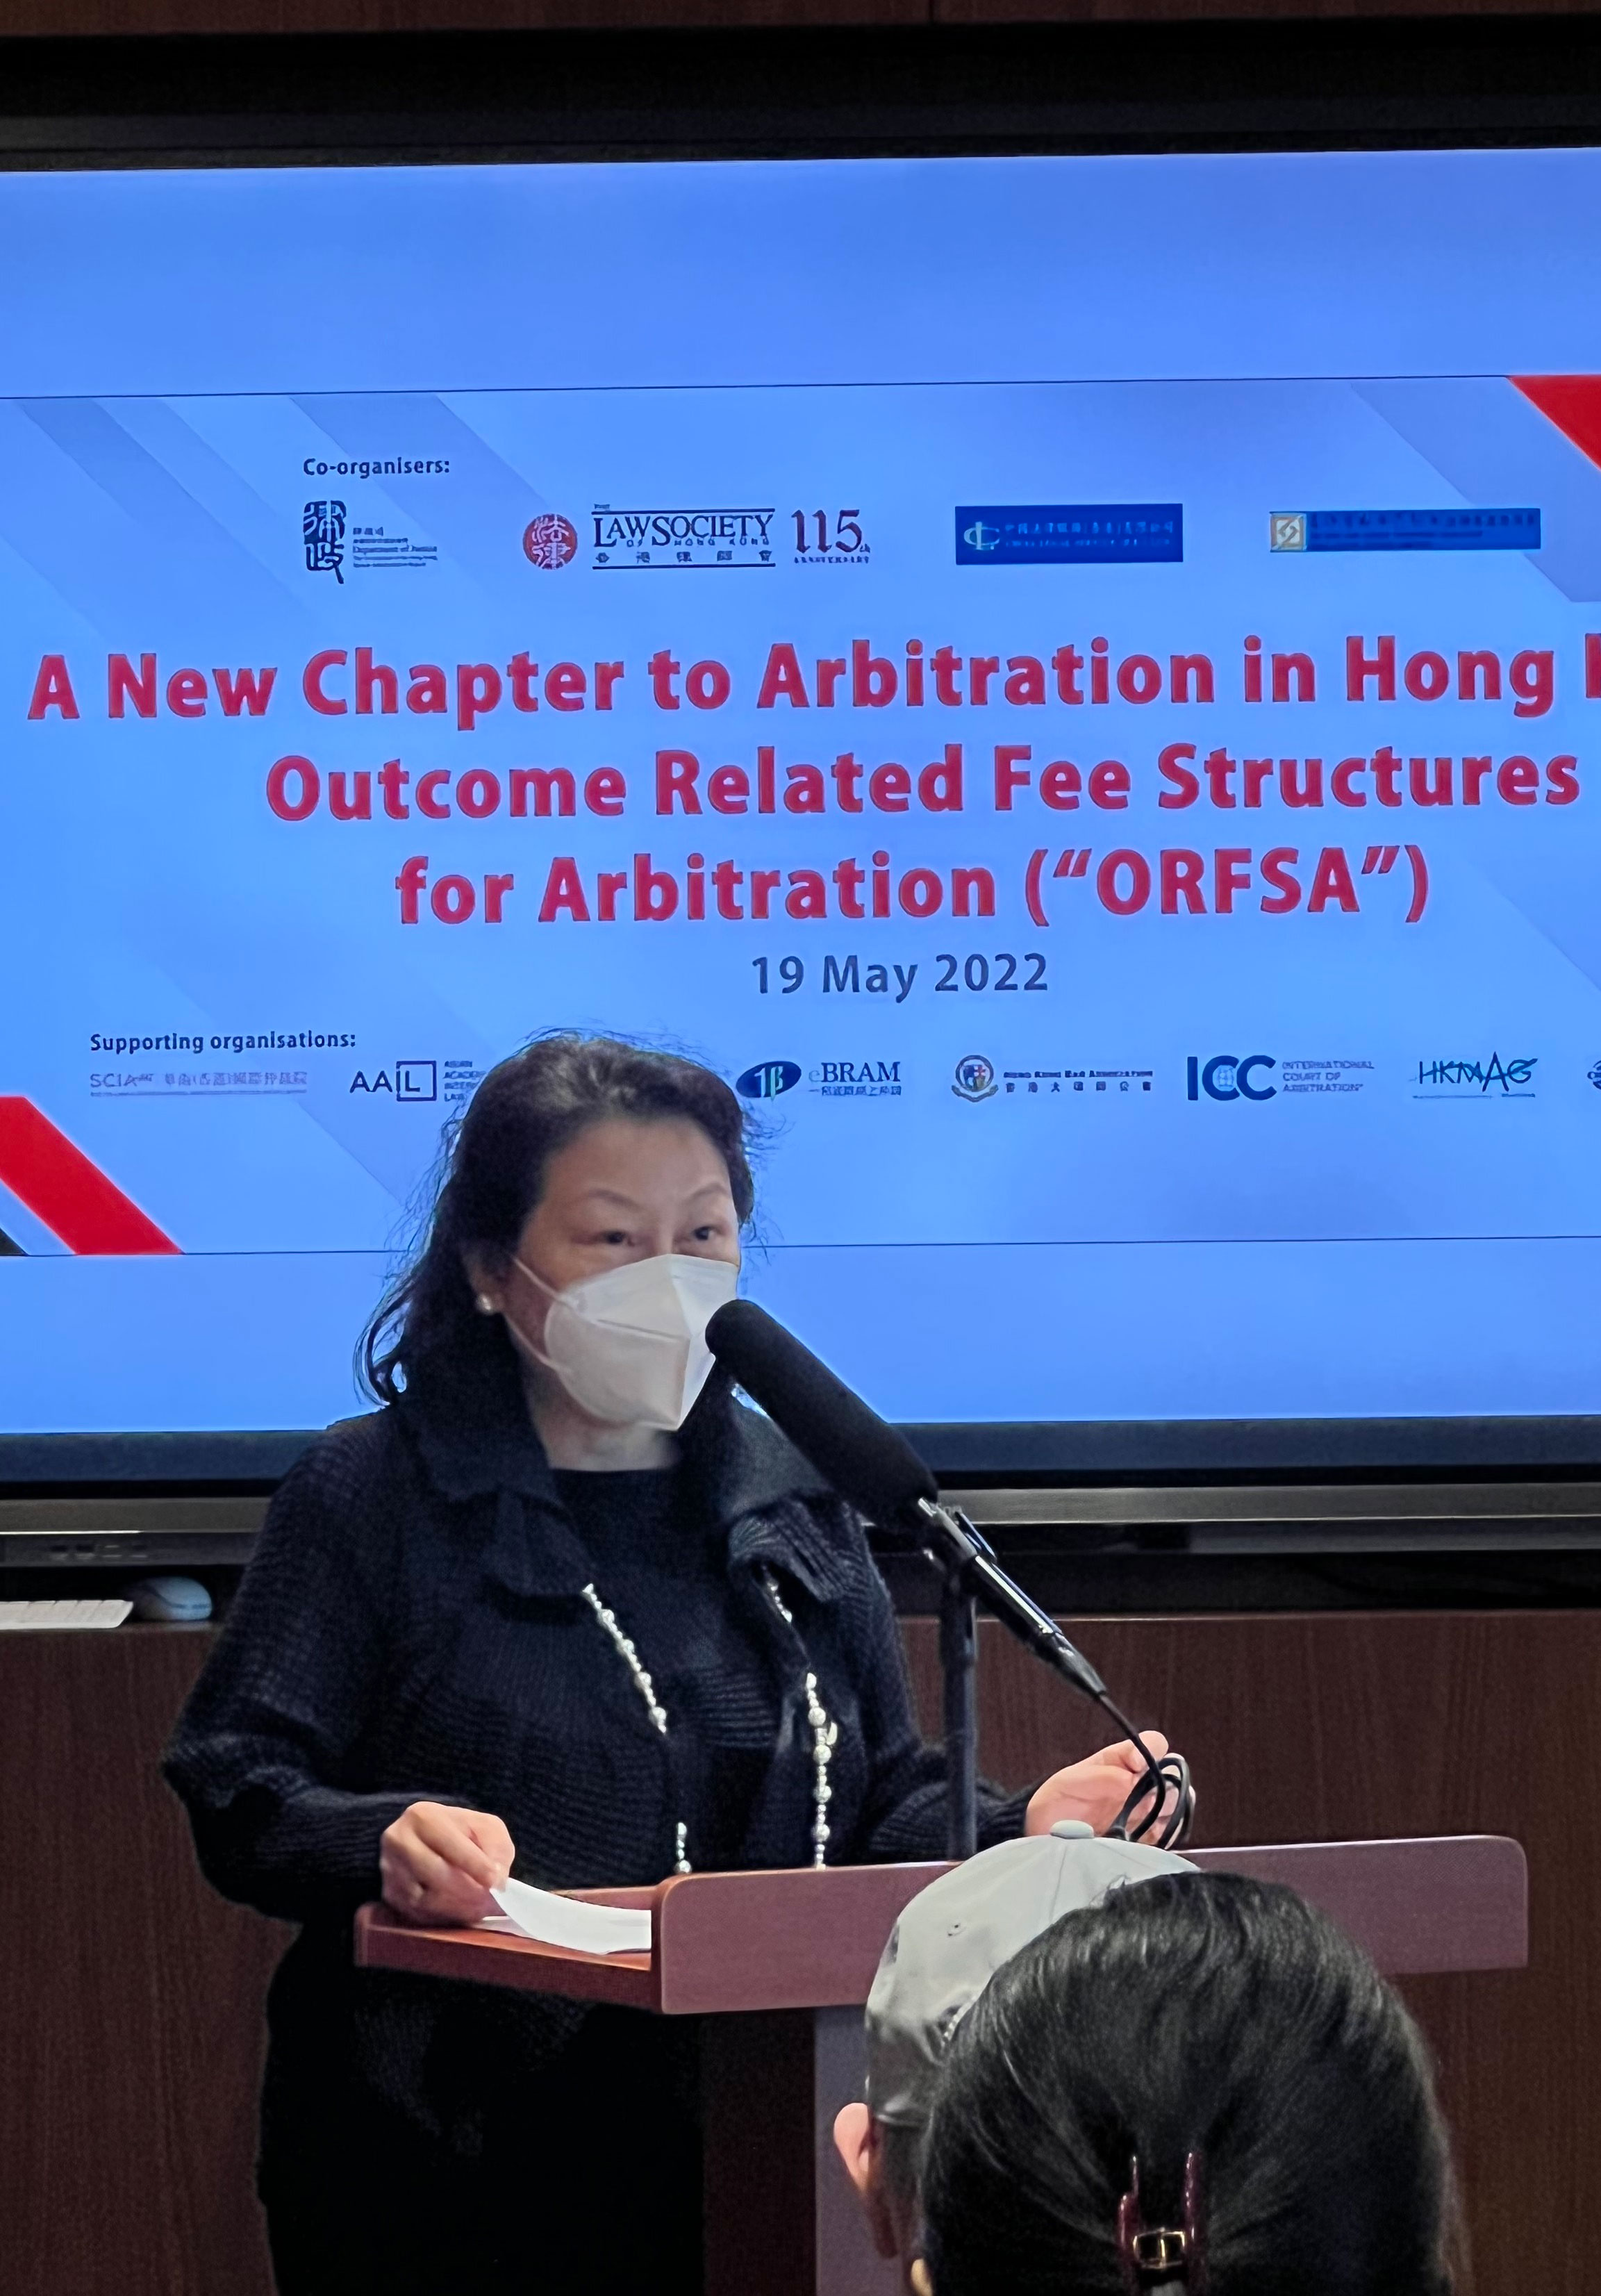 SJ speaks at seminar entitled "A New Chapter to Arbitration in Hong Kong: Outcome Related Fee Structures for Arbitration"